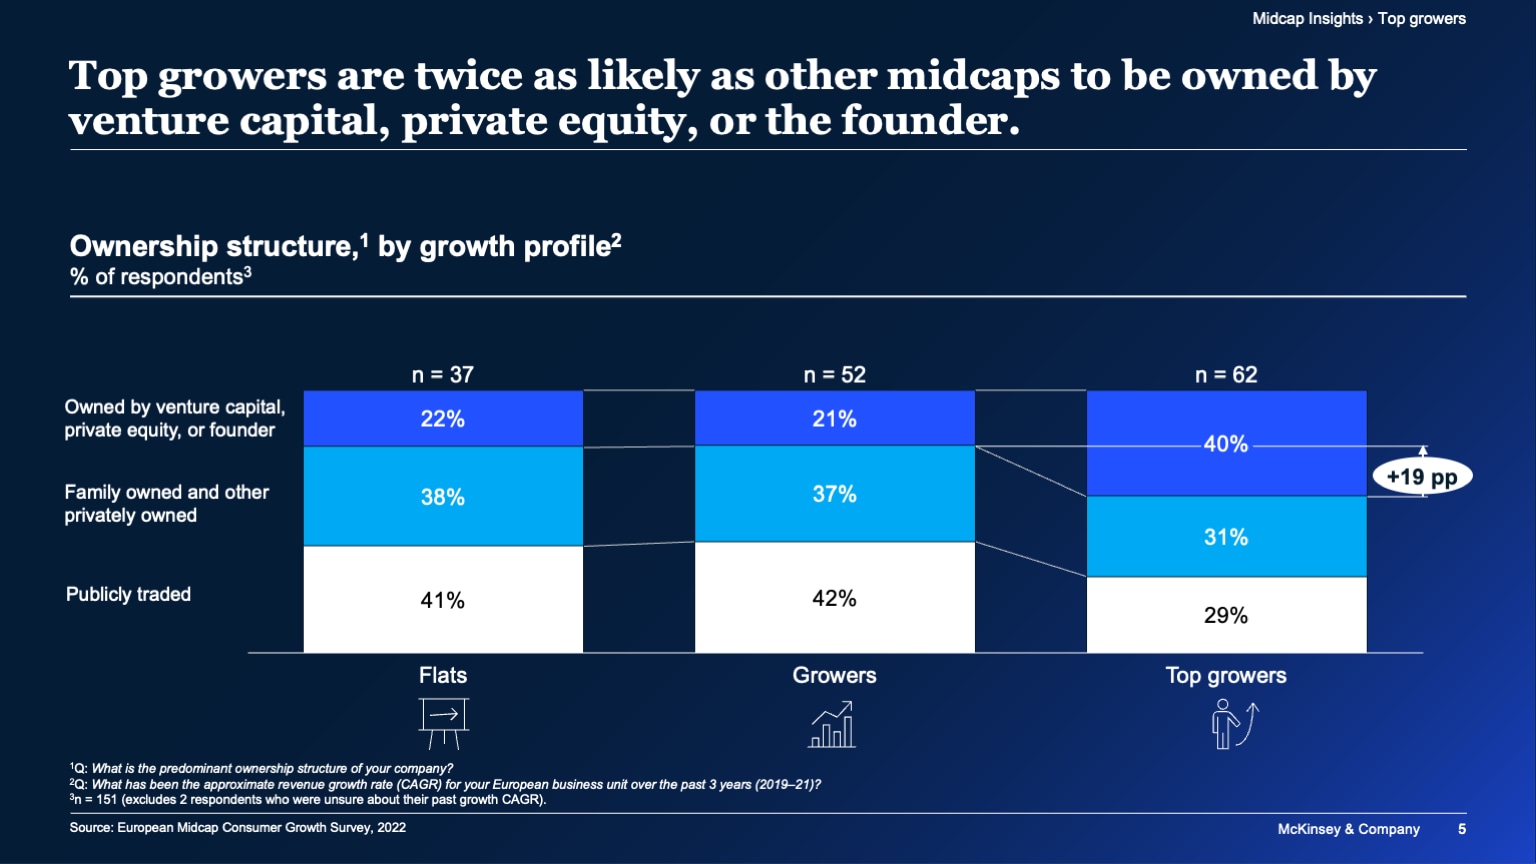 Top growers are twice as likely as other midcaps to be owned by venture capital, private equity, or the founder.